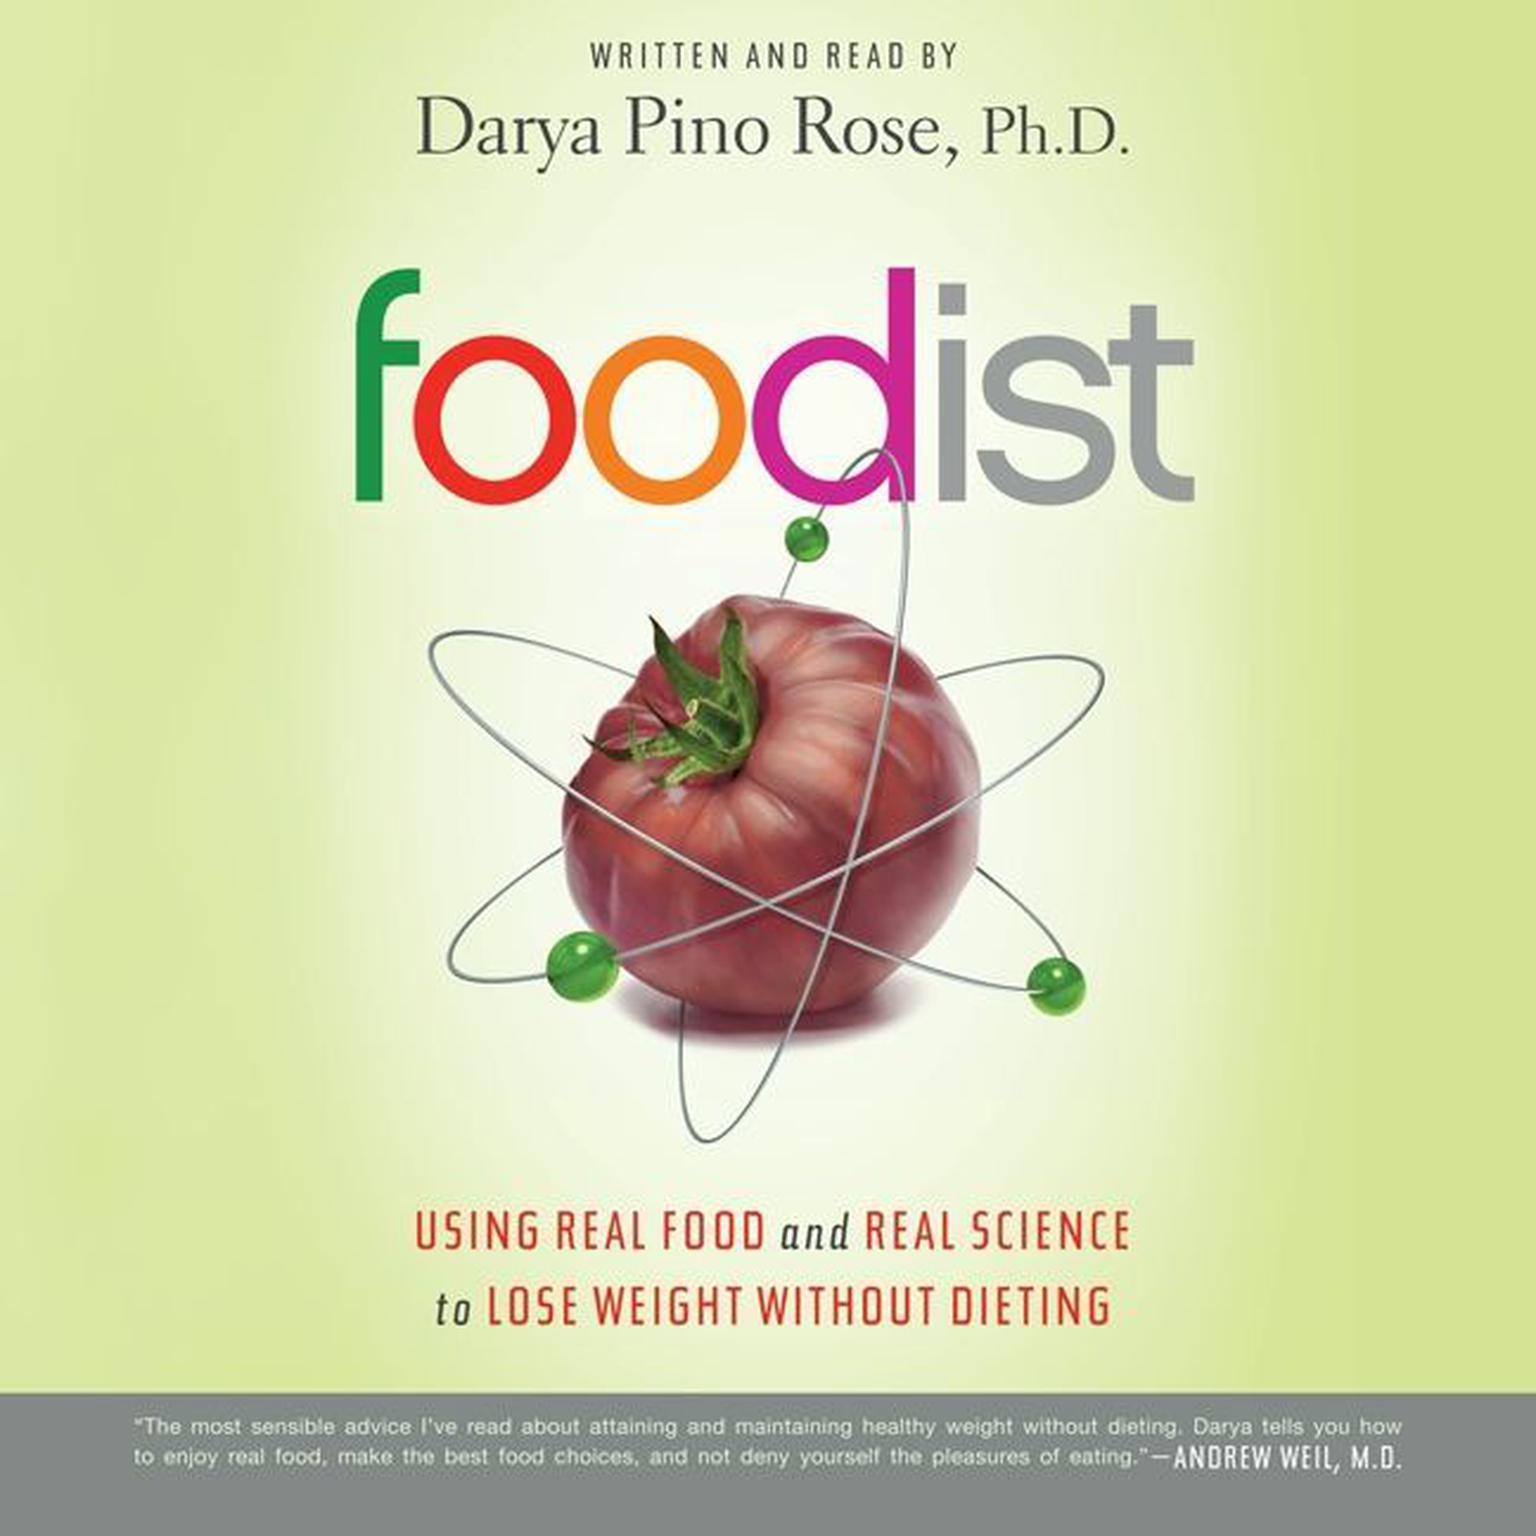 Foodist: Using Real Food and Real Science to Lose Weight Without Dieting Audiobook, by Darya Pino Rose